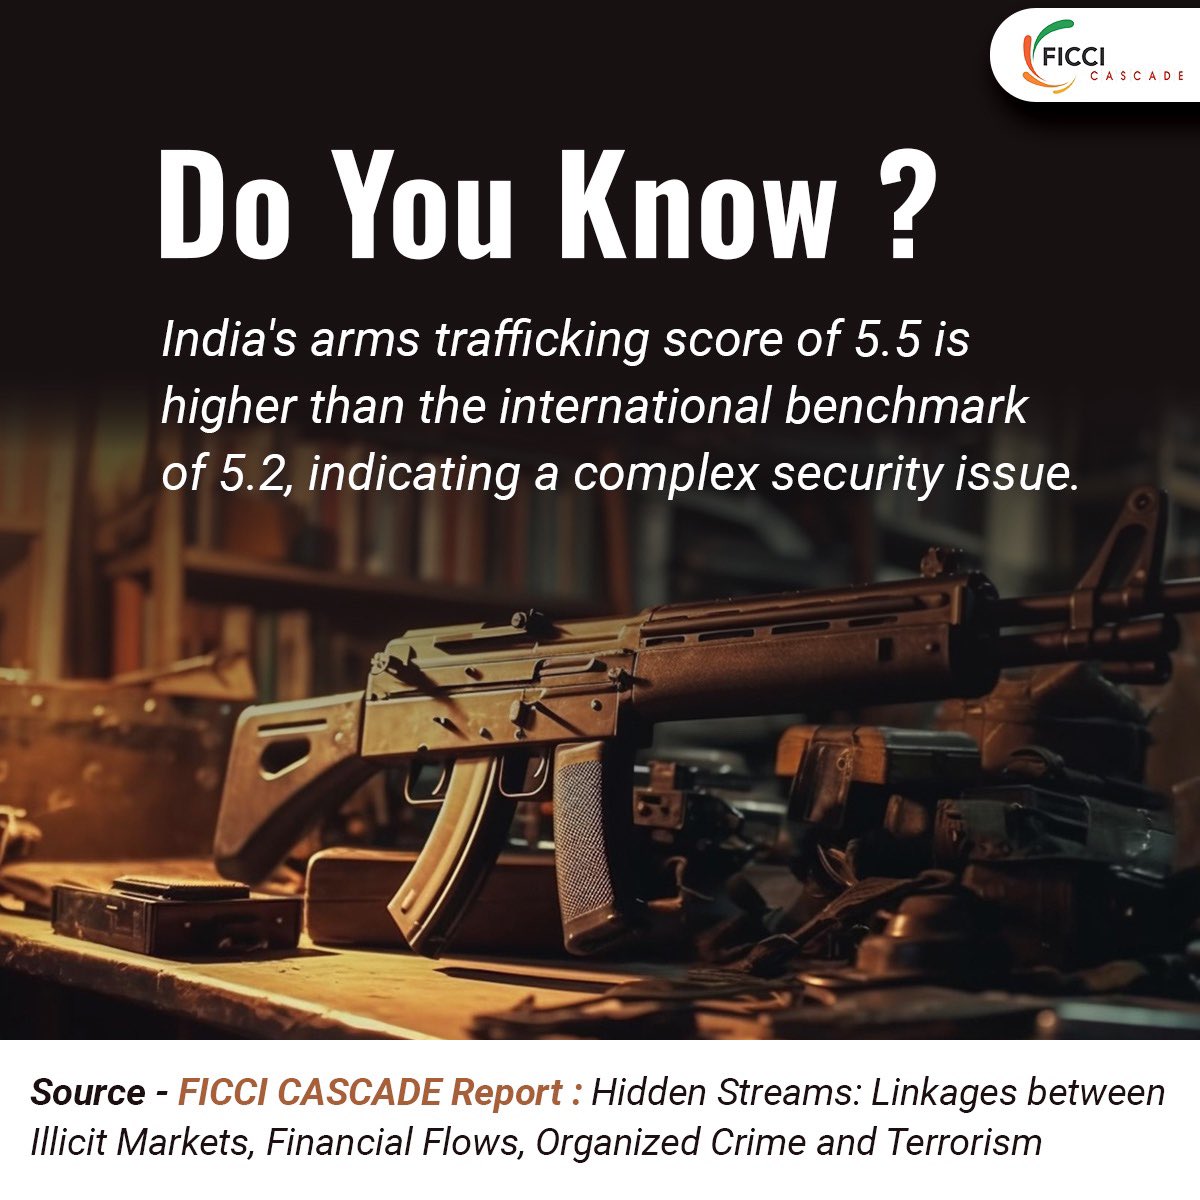 India's arms trafficking score is higher than the global benchmark, indicating a big security problem. #SecurityChallenge #ArmsTrafficking